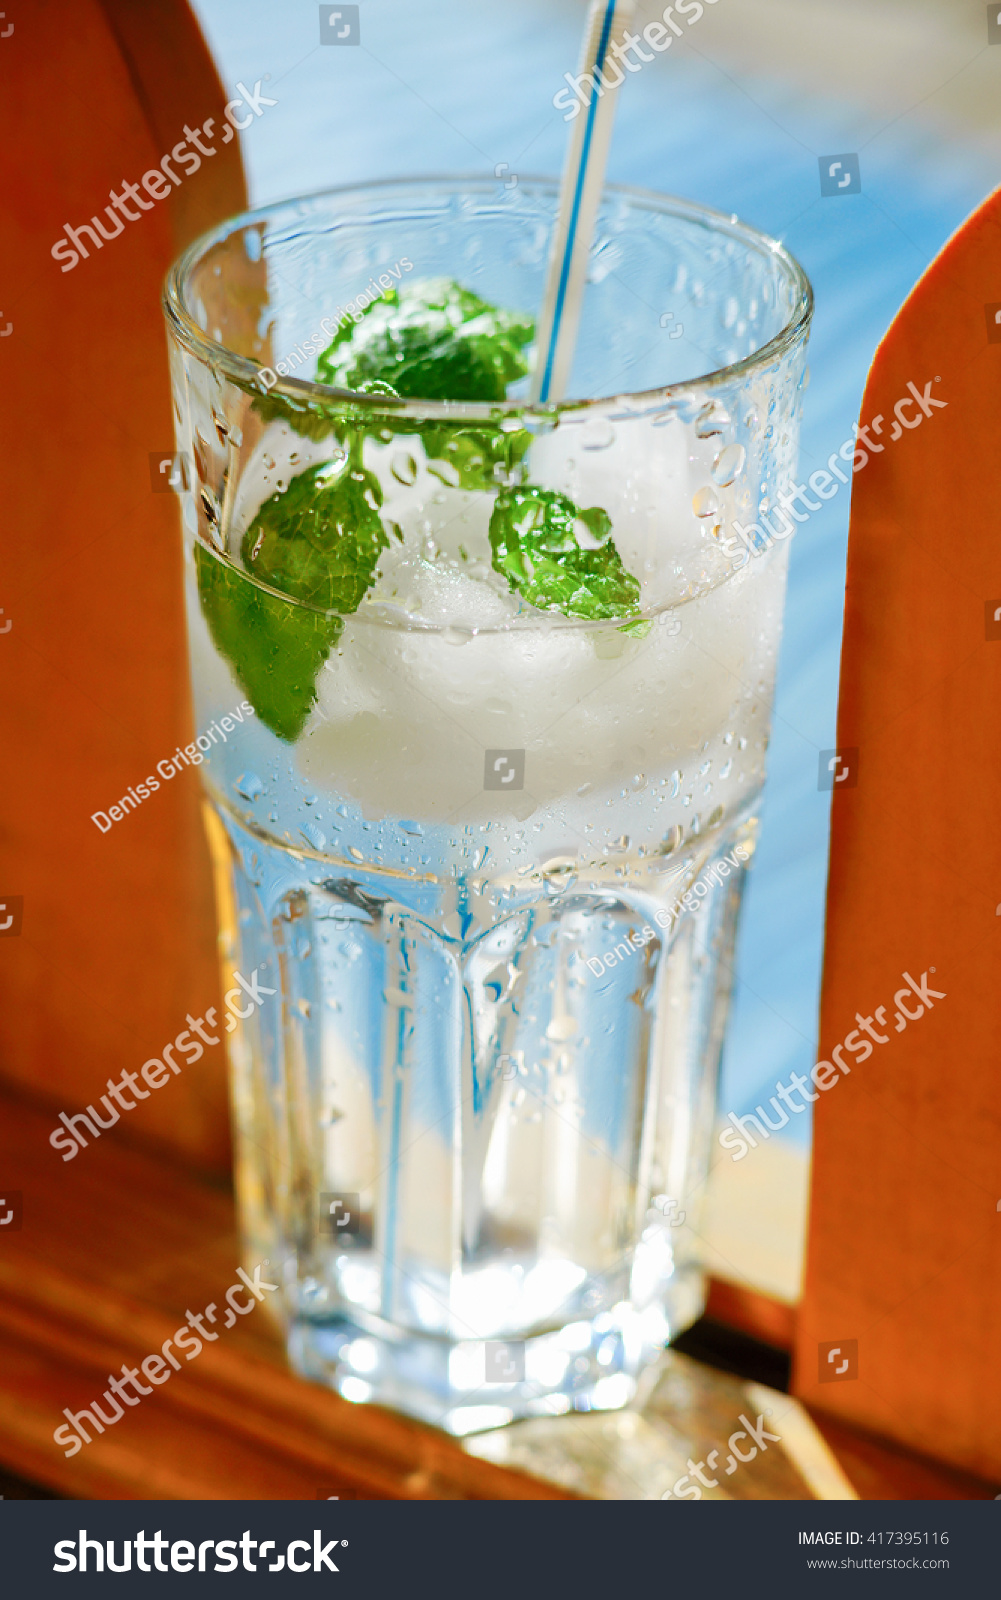 Fresh water with mint leaves #417395116